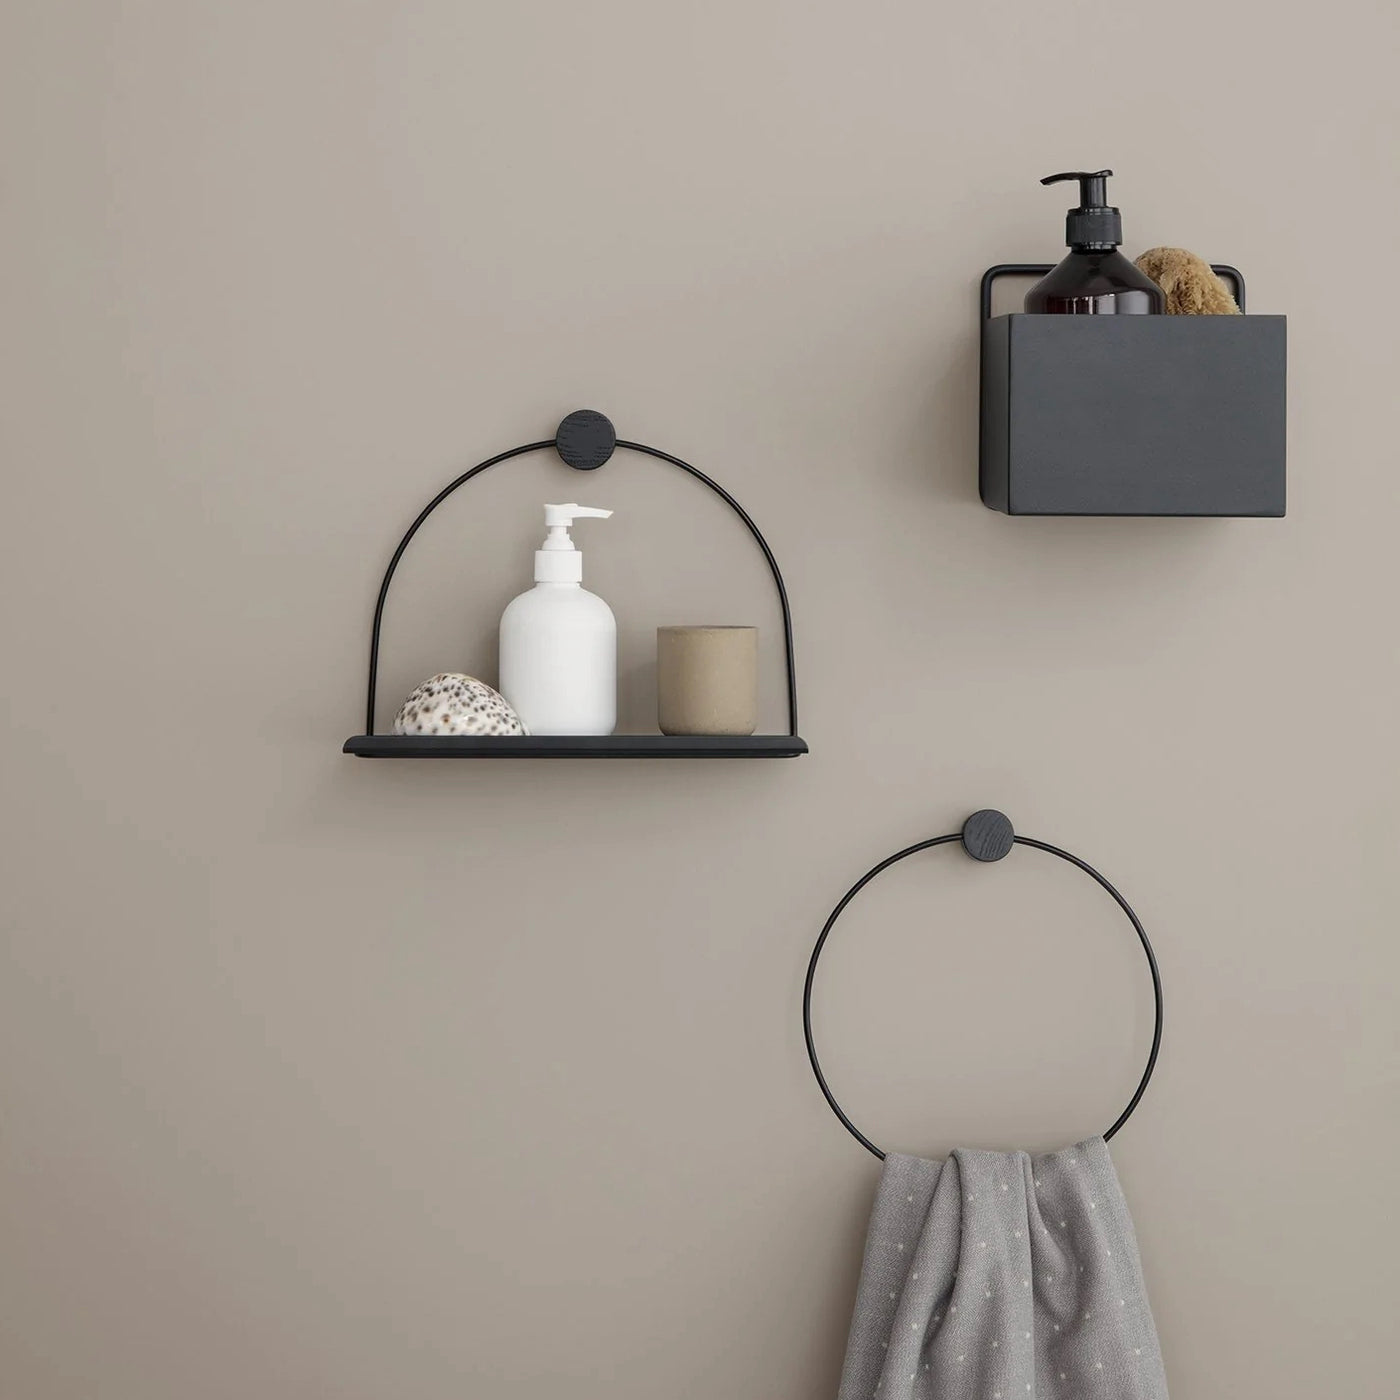 Minimal bathroom with black towel holder from Ferm Living